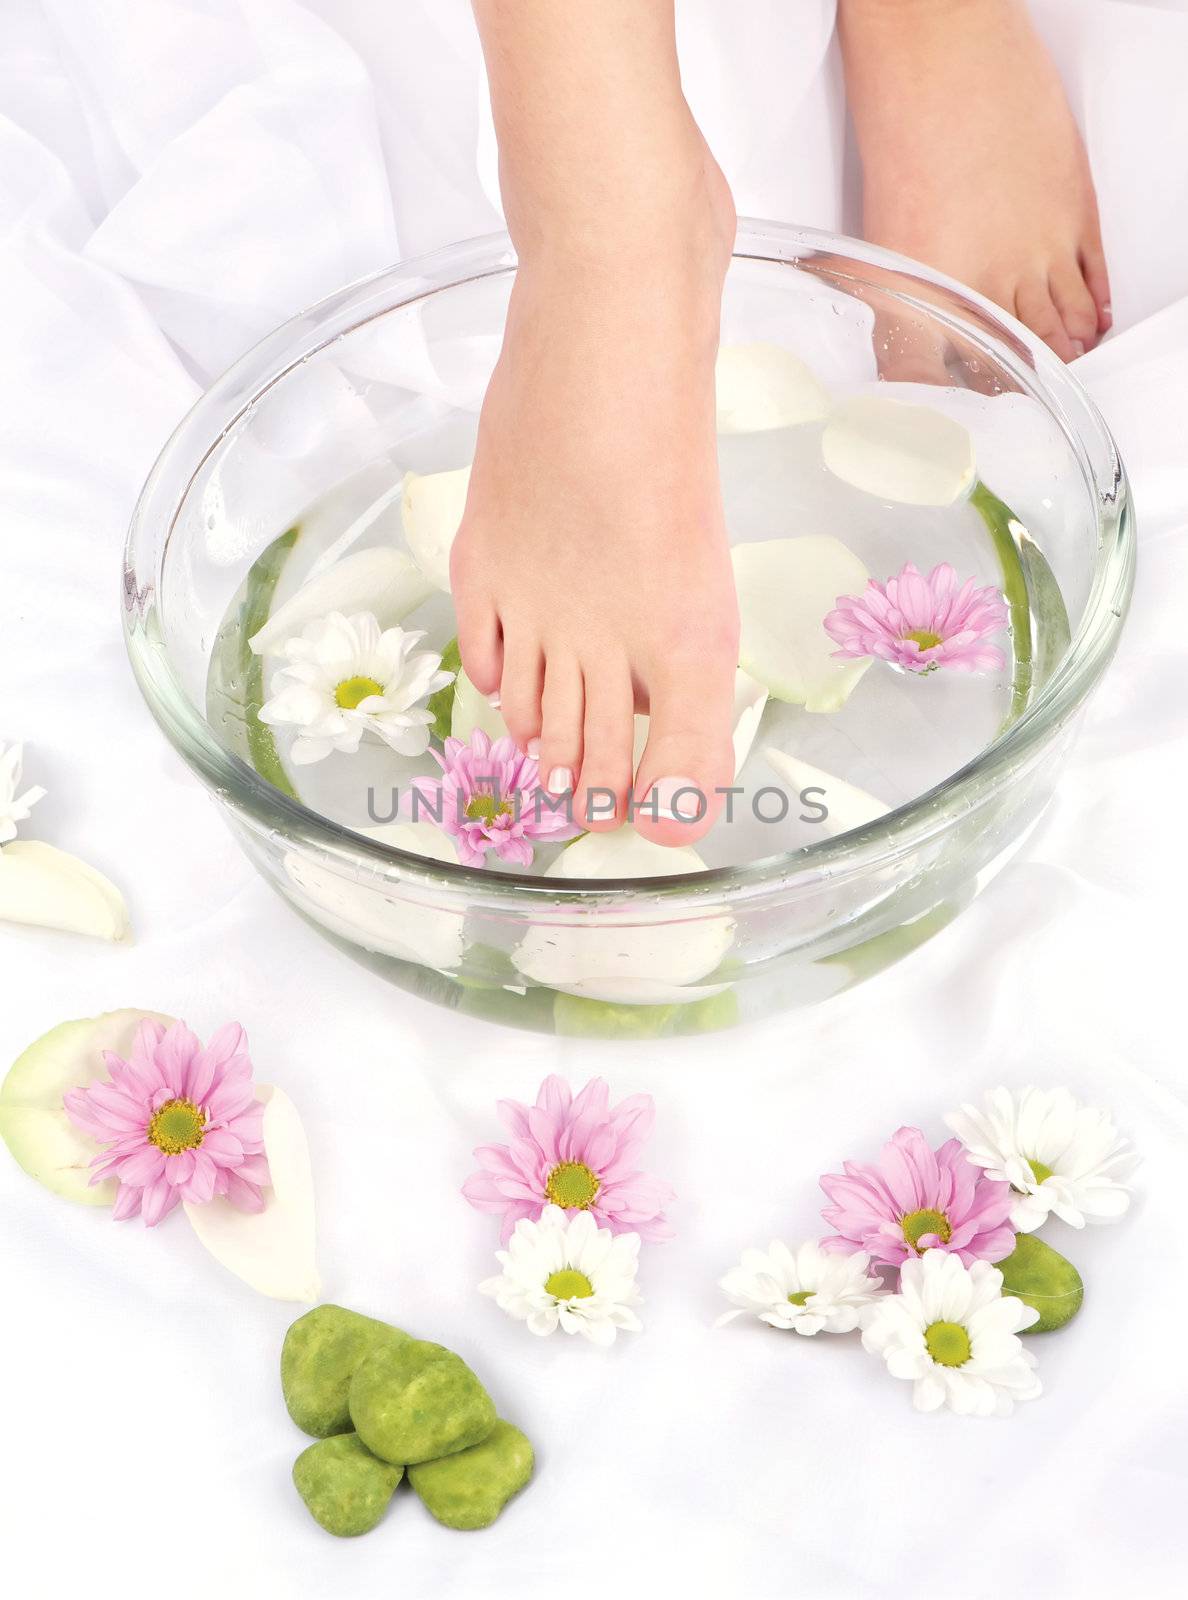 Feet dipped in aromatherapy bowl